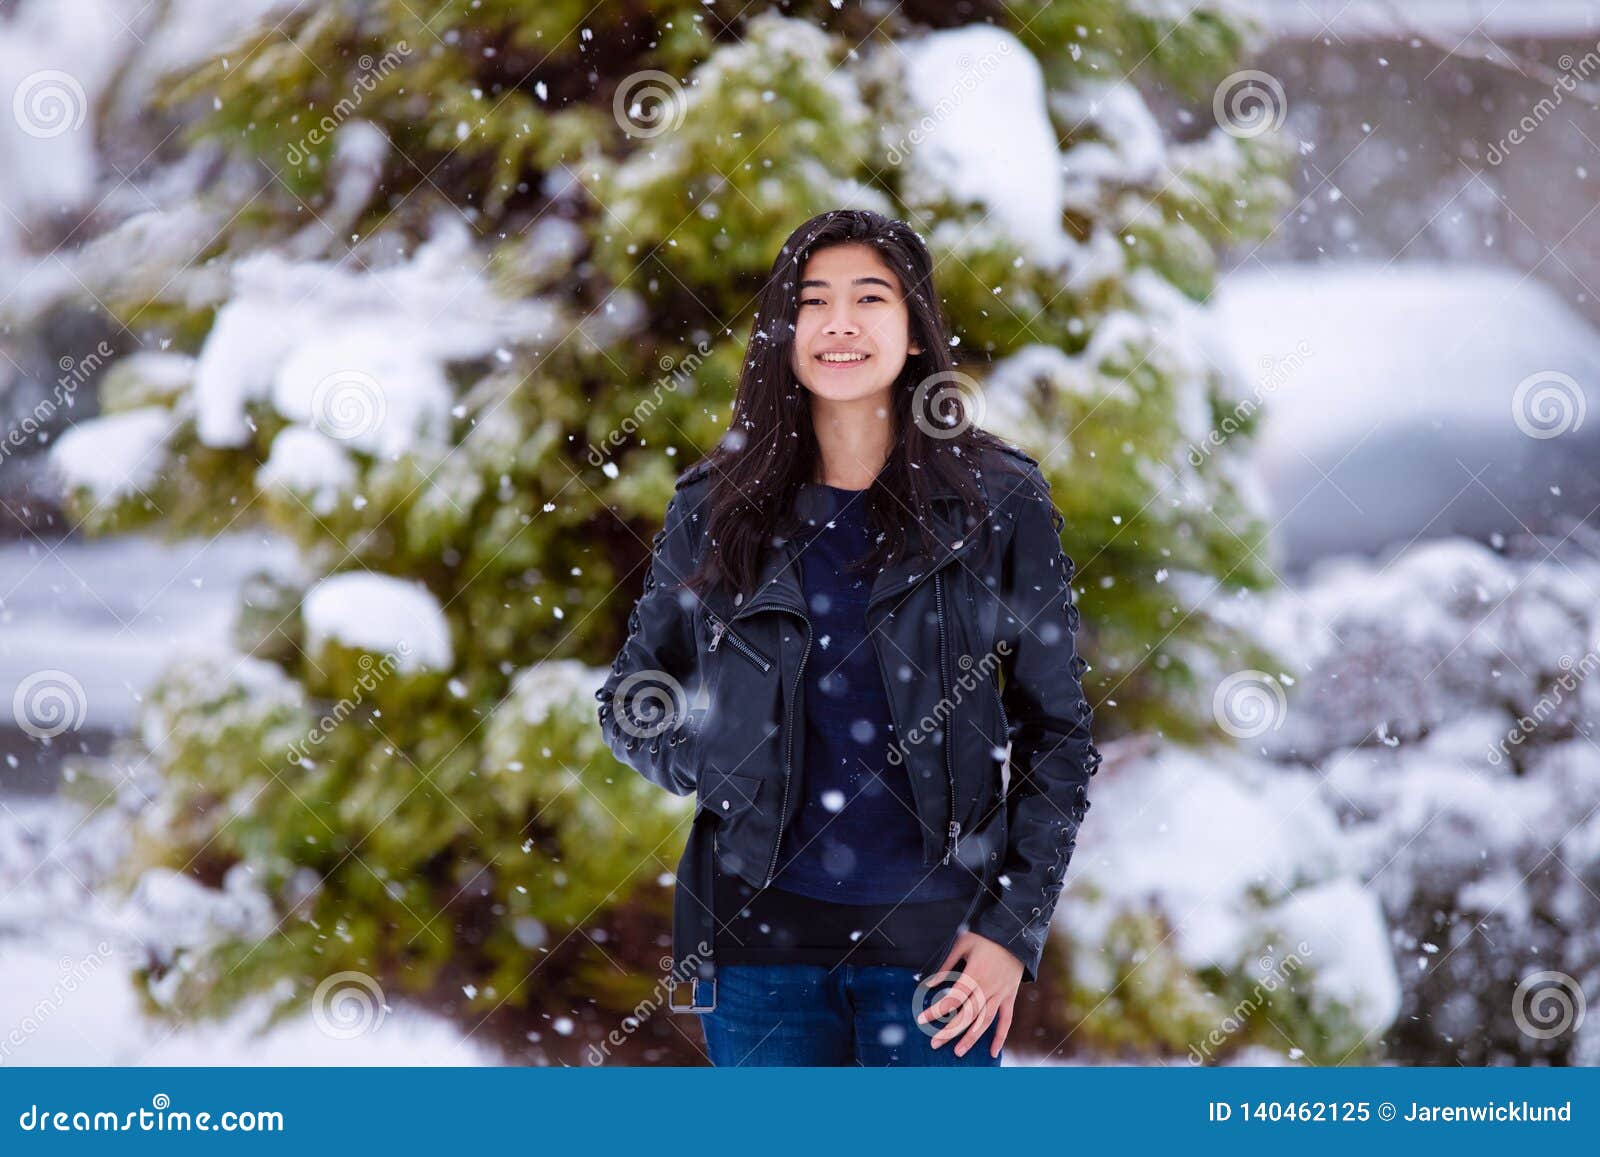 Teen Girl Outdoors during Snowfall Wearing Black Leather Jacket Stock ...